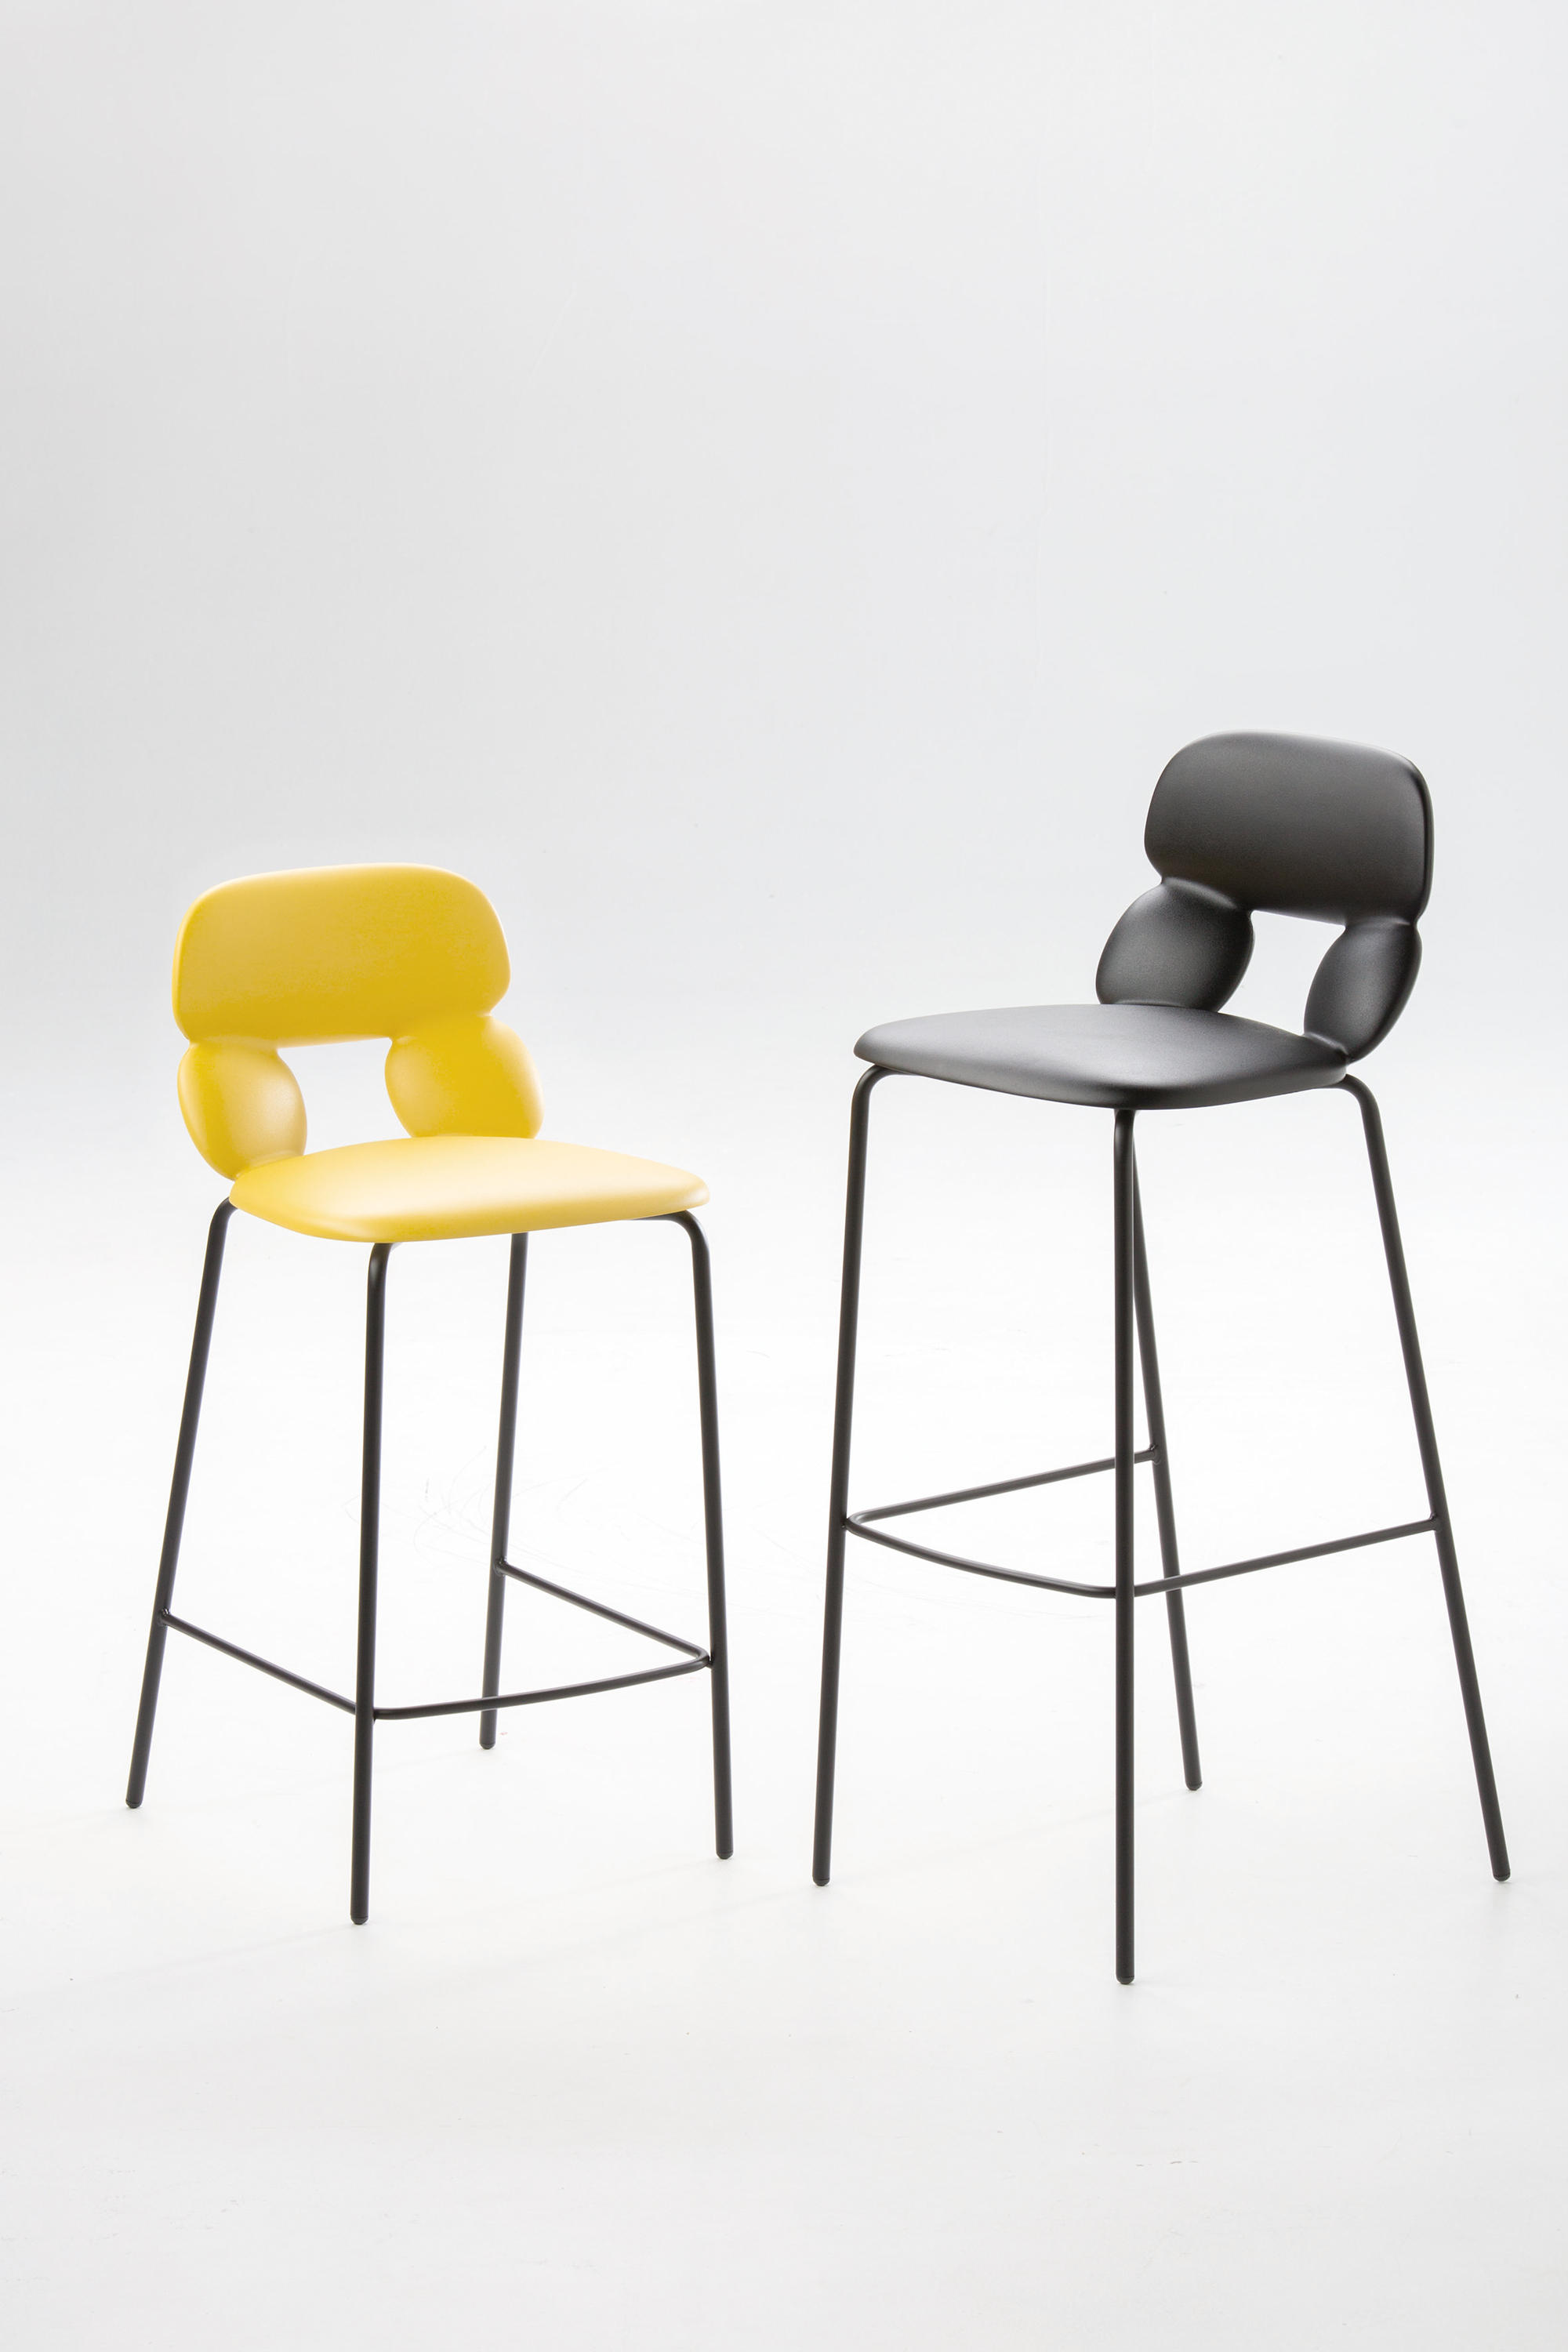 Nube by Roberto Paoli for CHAIRS & MORE